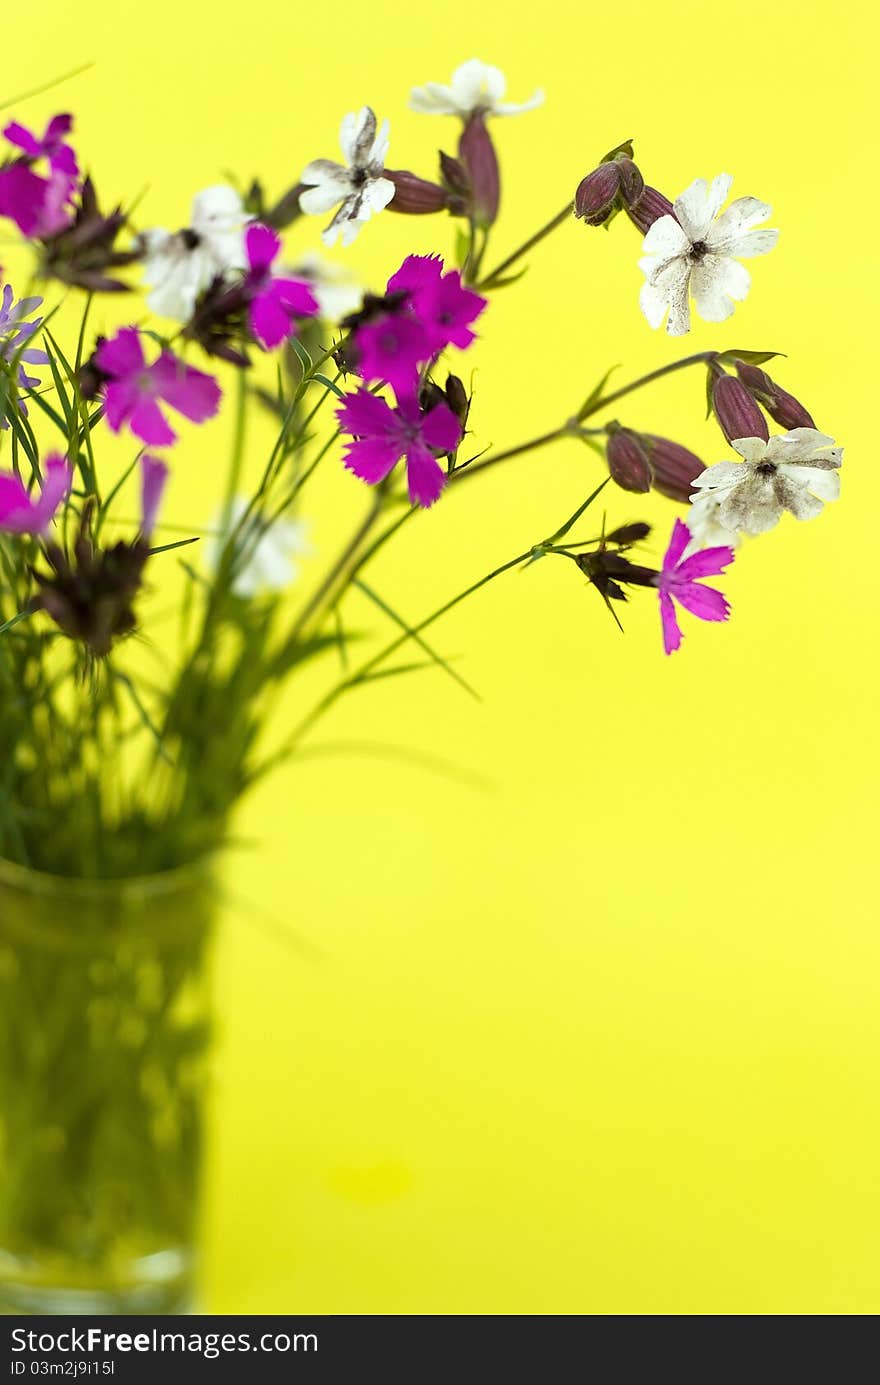 Purple and white wild flowers on a yellow background